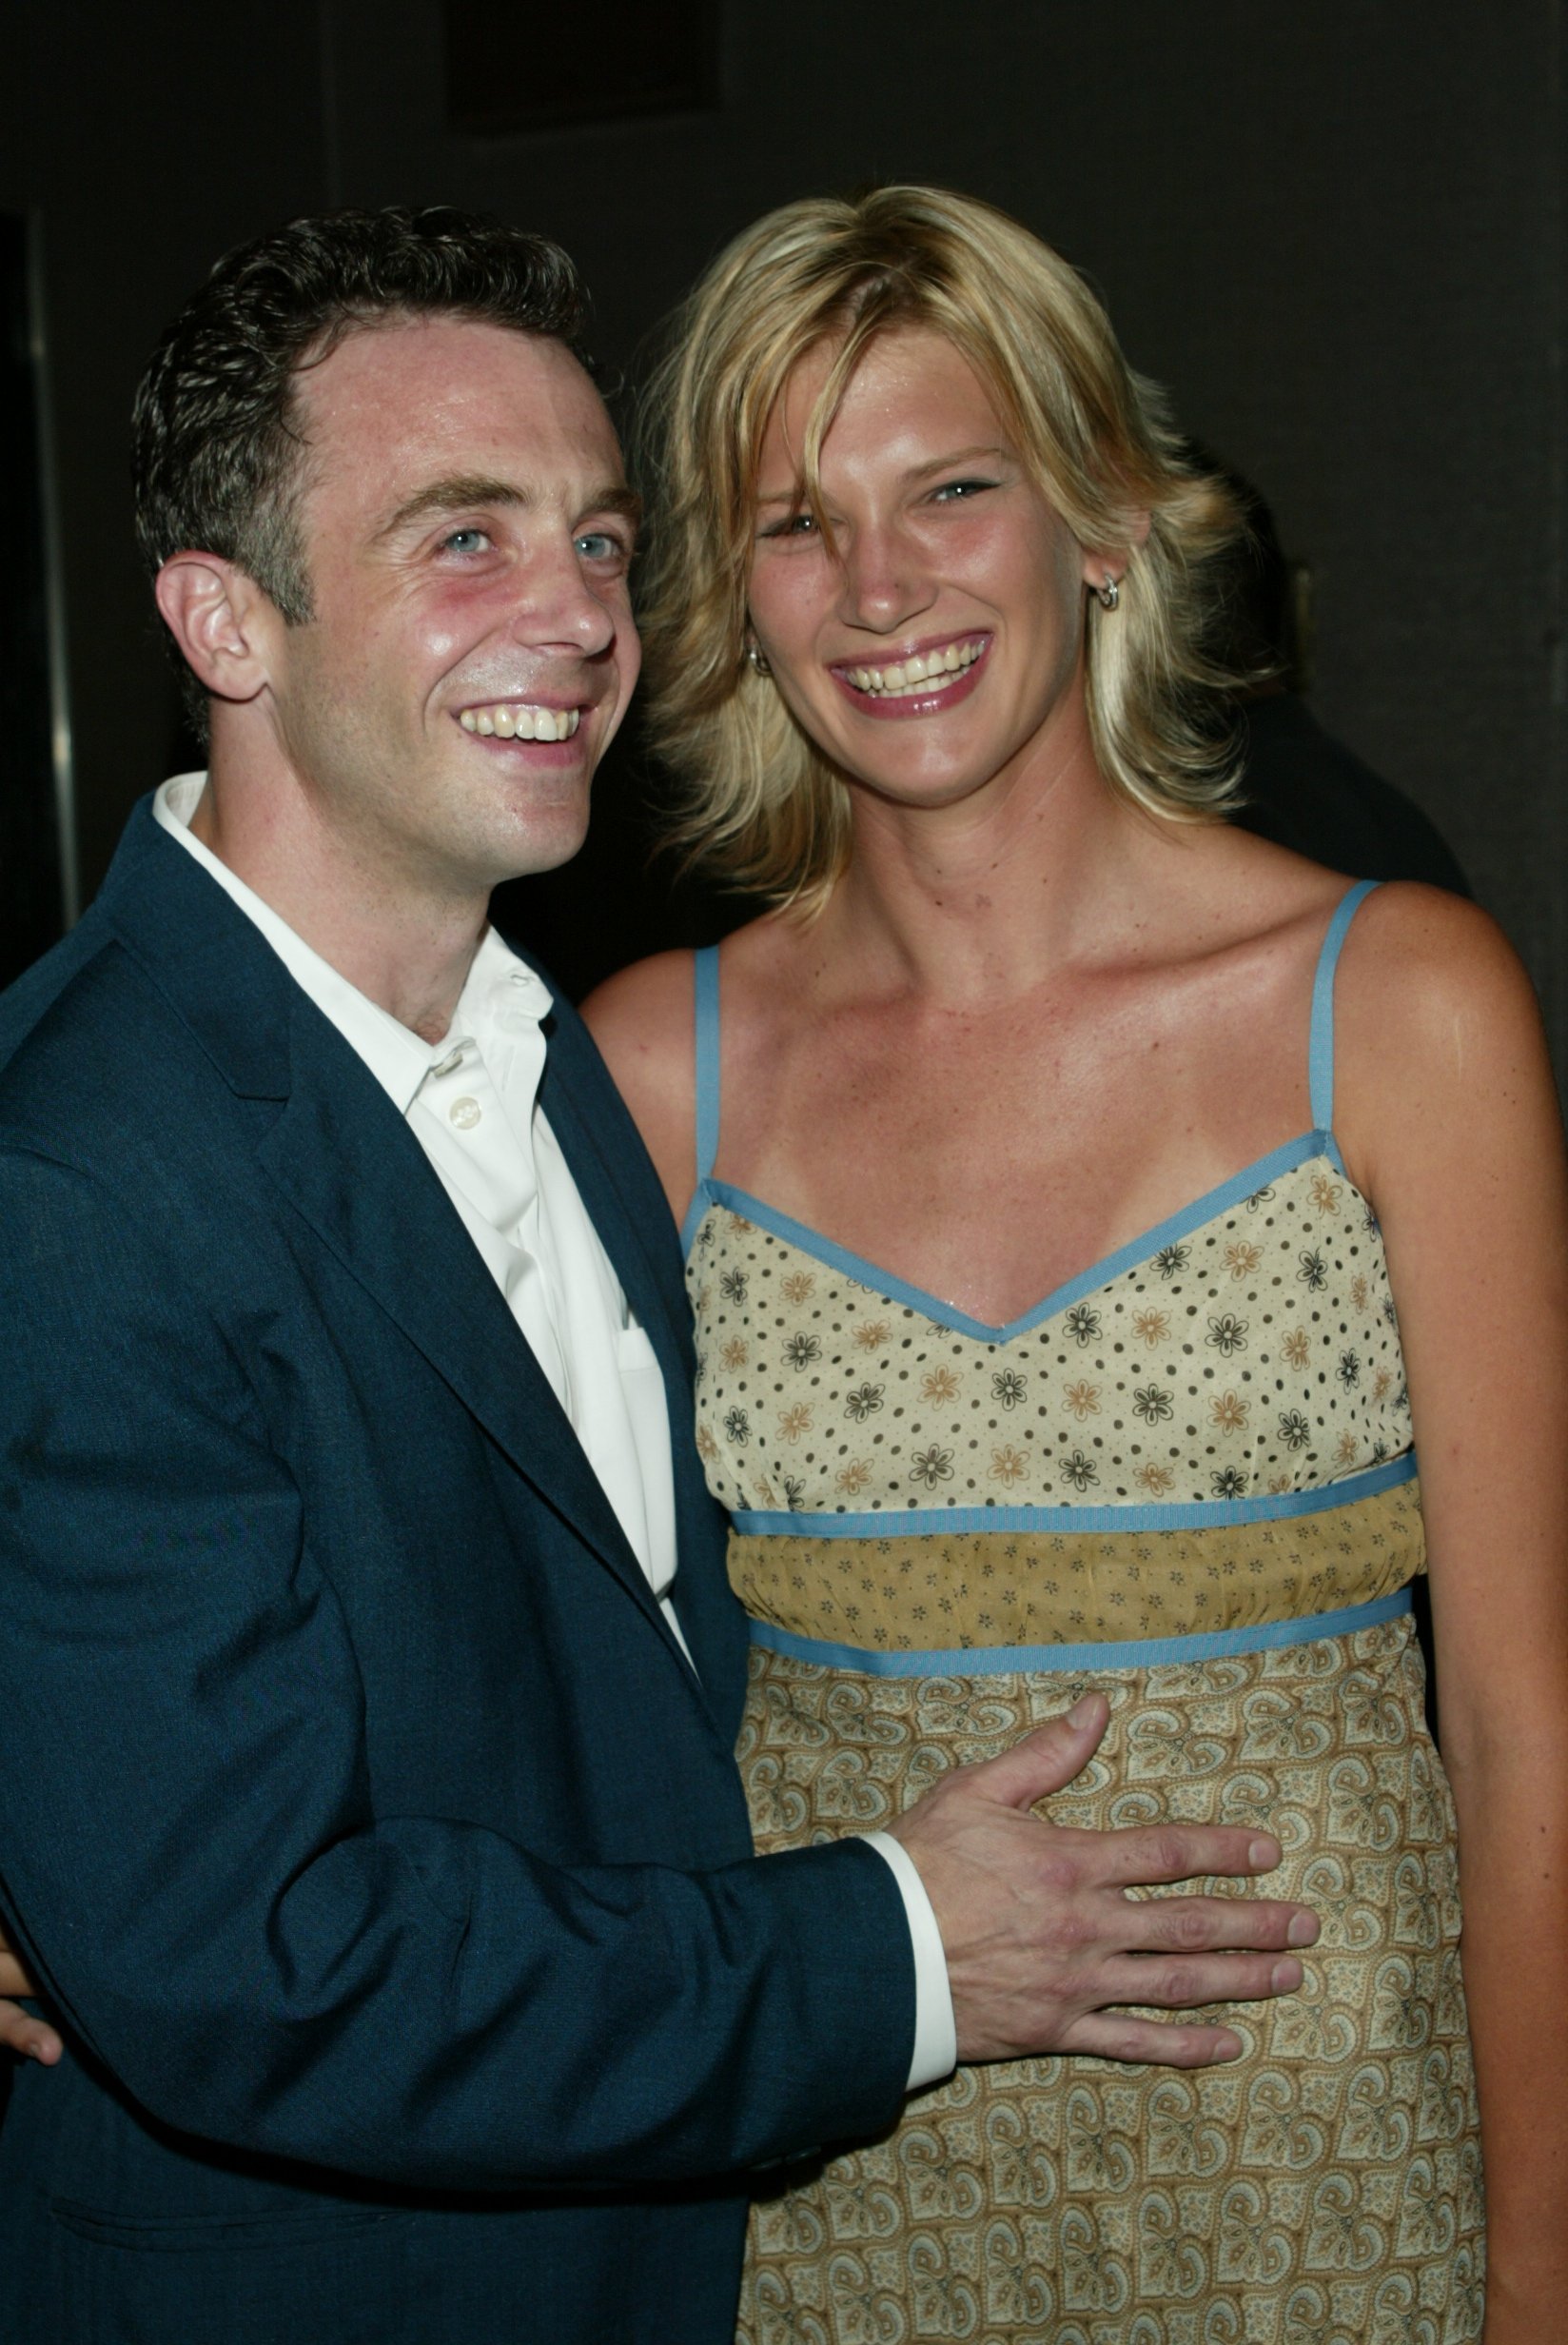 David Eigenberg with girlfriend Chrysti Kotik arriving at the "Tadpole" film premiere at Cinema II in New York City. July 15, 2002 | Photo: GettyImages